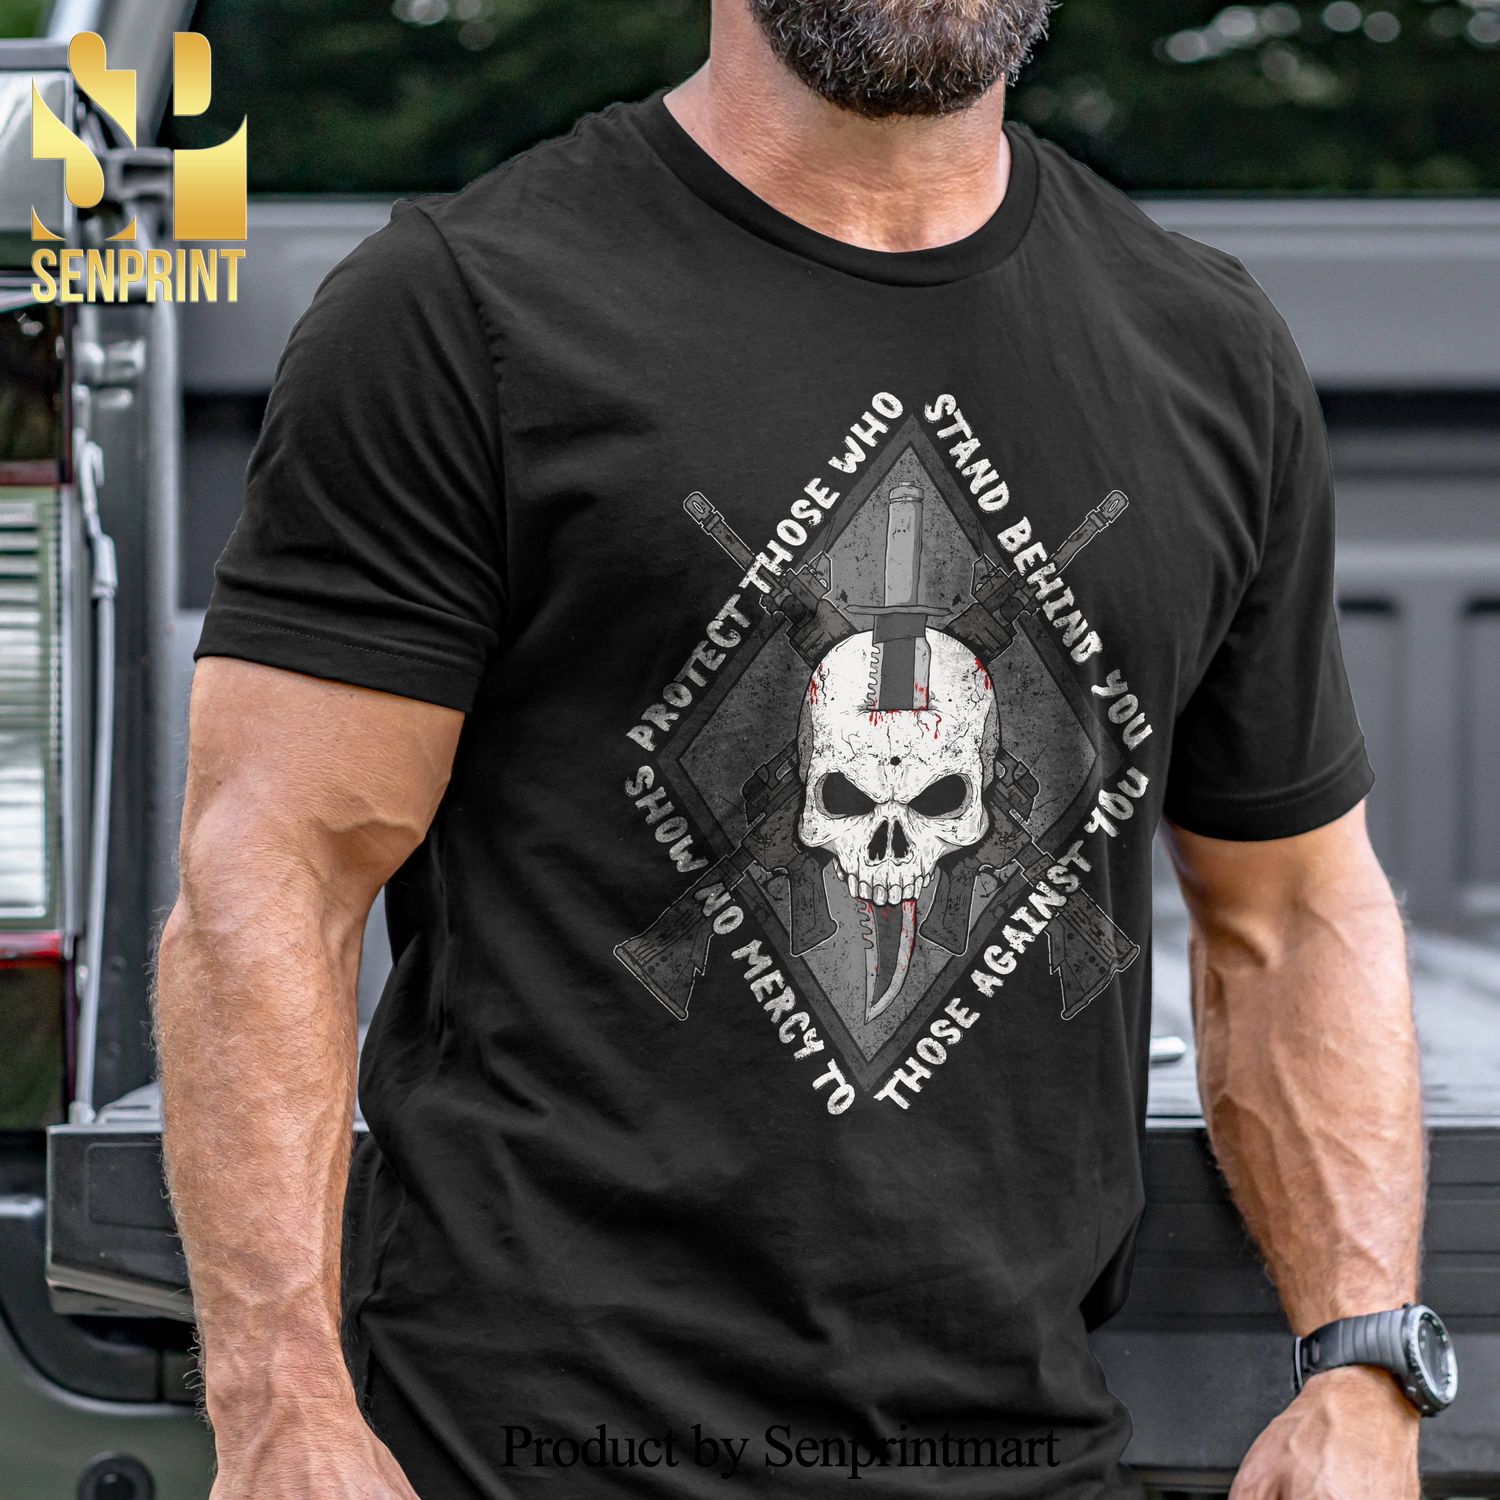 Protect Those Who Stand Behind You Military Unisex Shirt